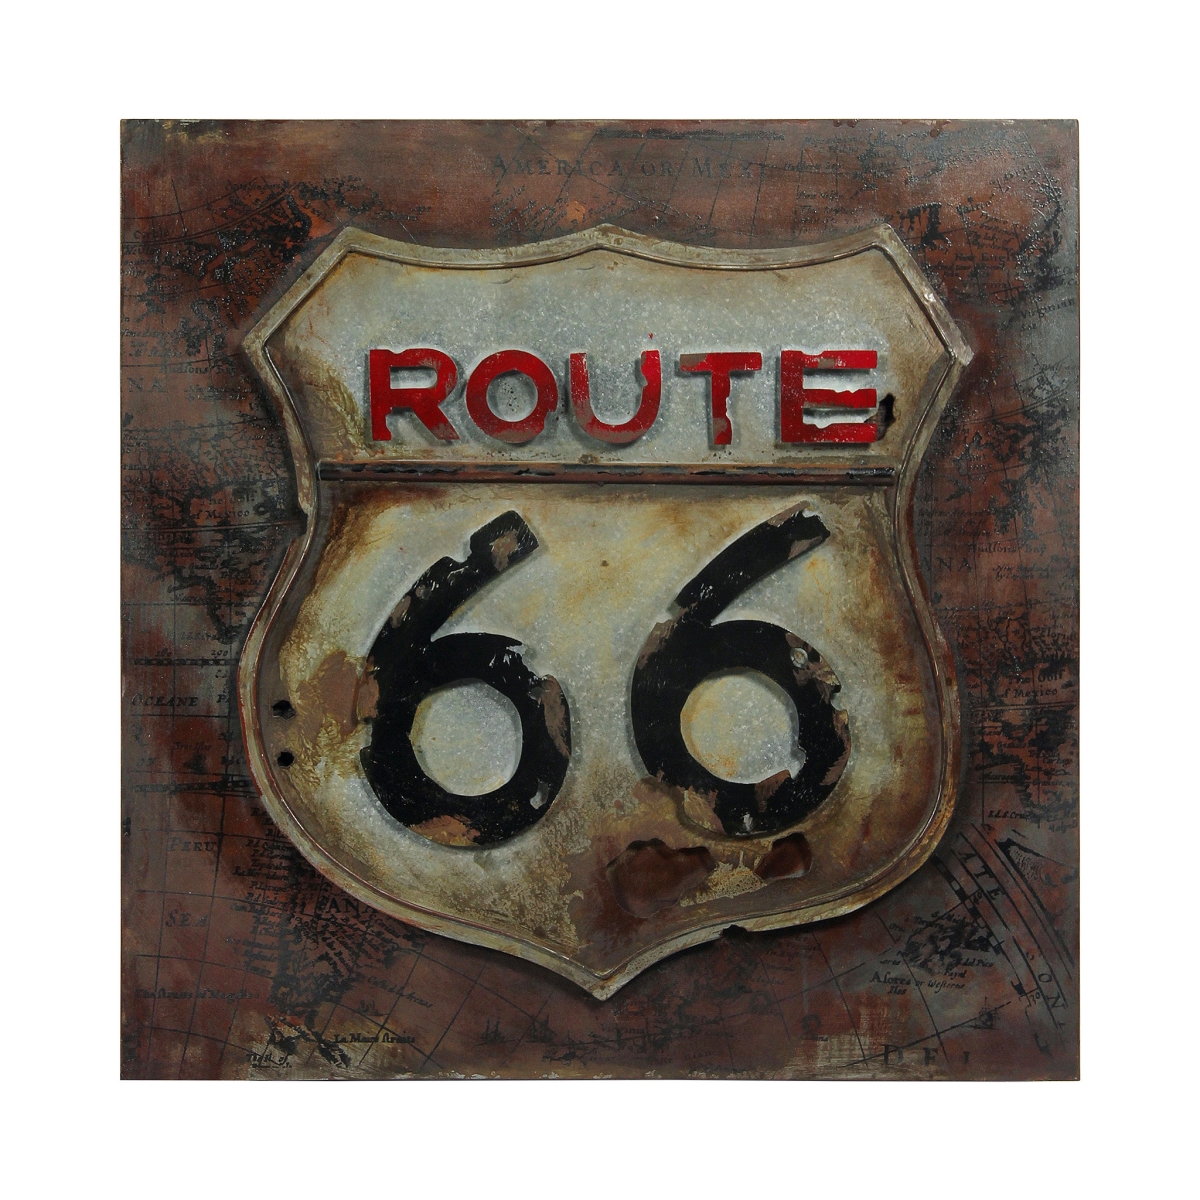 Empire Art Direct PMO-120722-3232 Primo Mixed Media Hand Painted Iron Wall Sculpture - Route 66